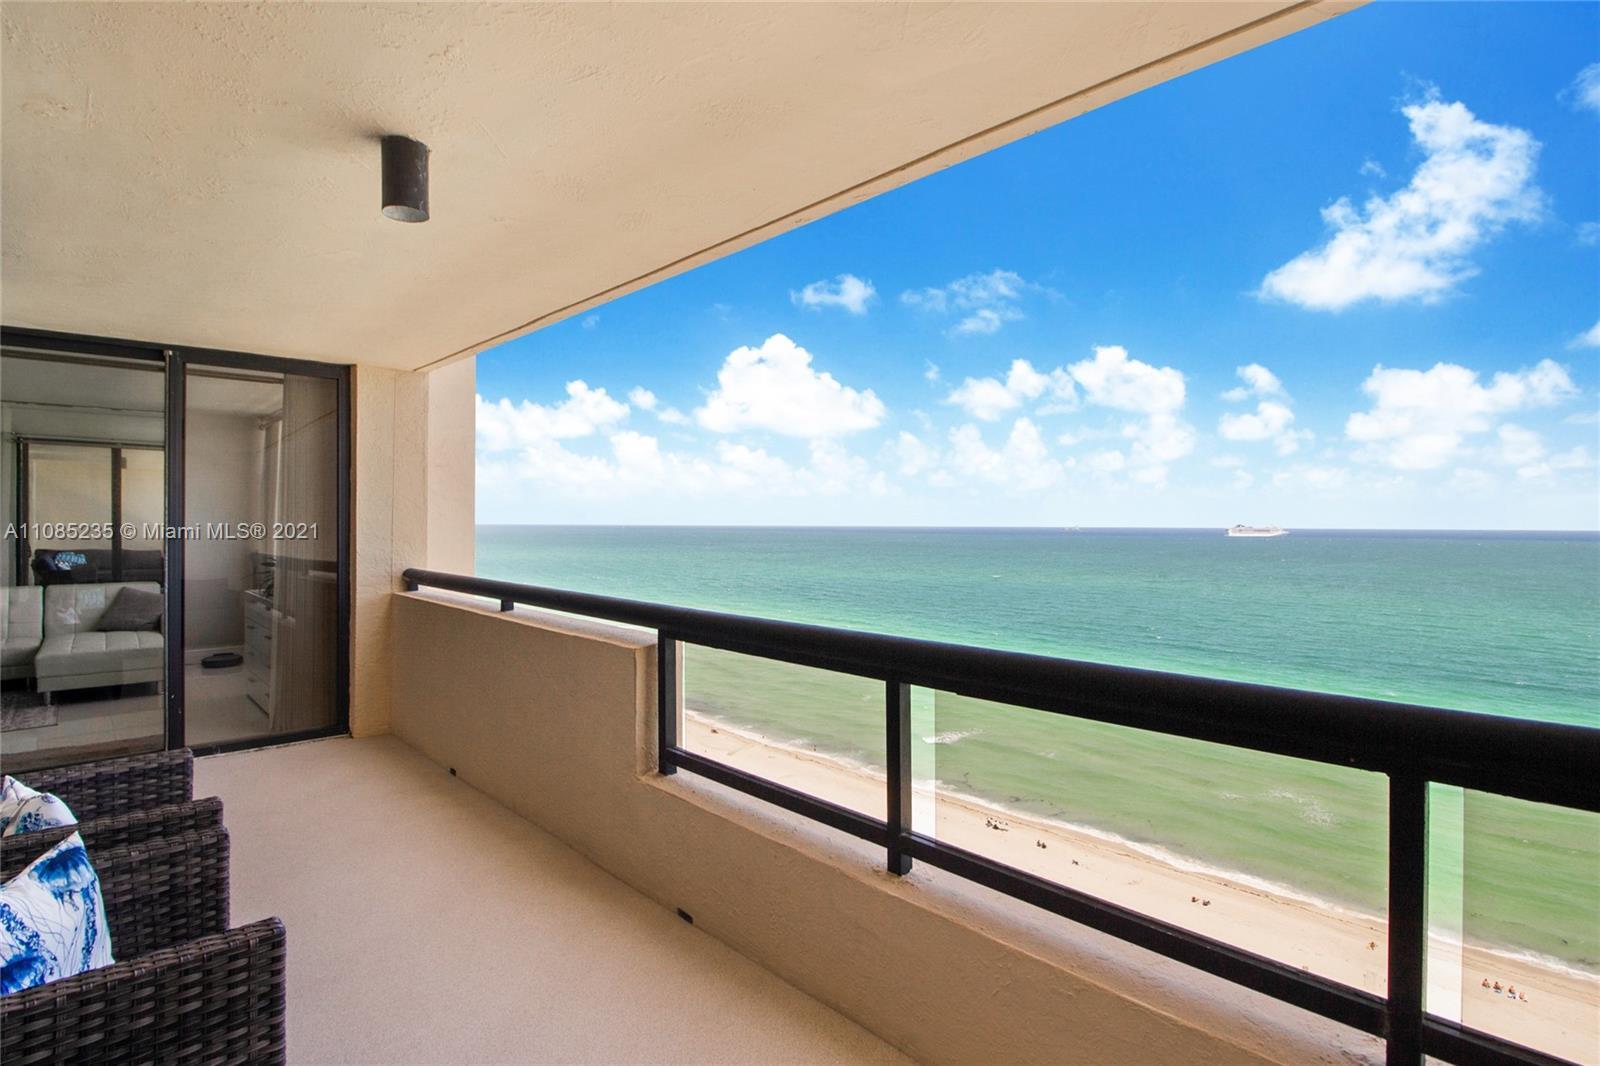 RARELY ON THE MARKET HIGH FLOOR OCEANFRONT UNIT WITH SWEEPING VIEWS OVER THE OCEAN AND SOUTH BEACH! 